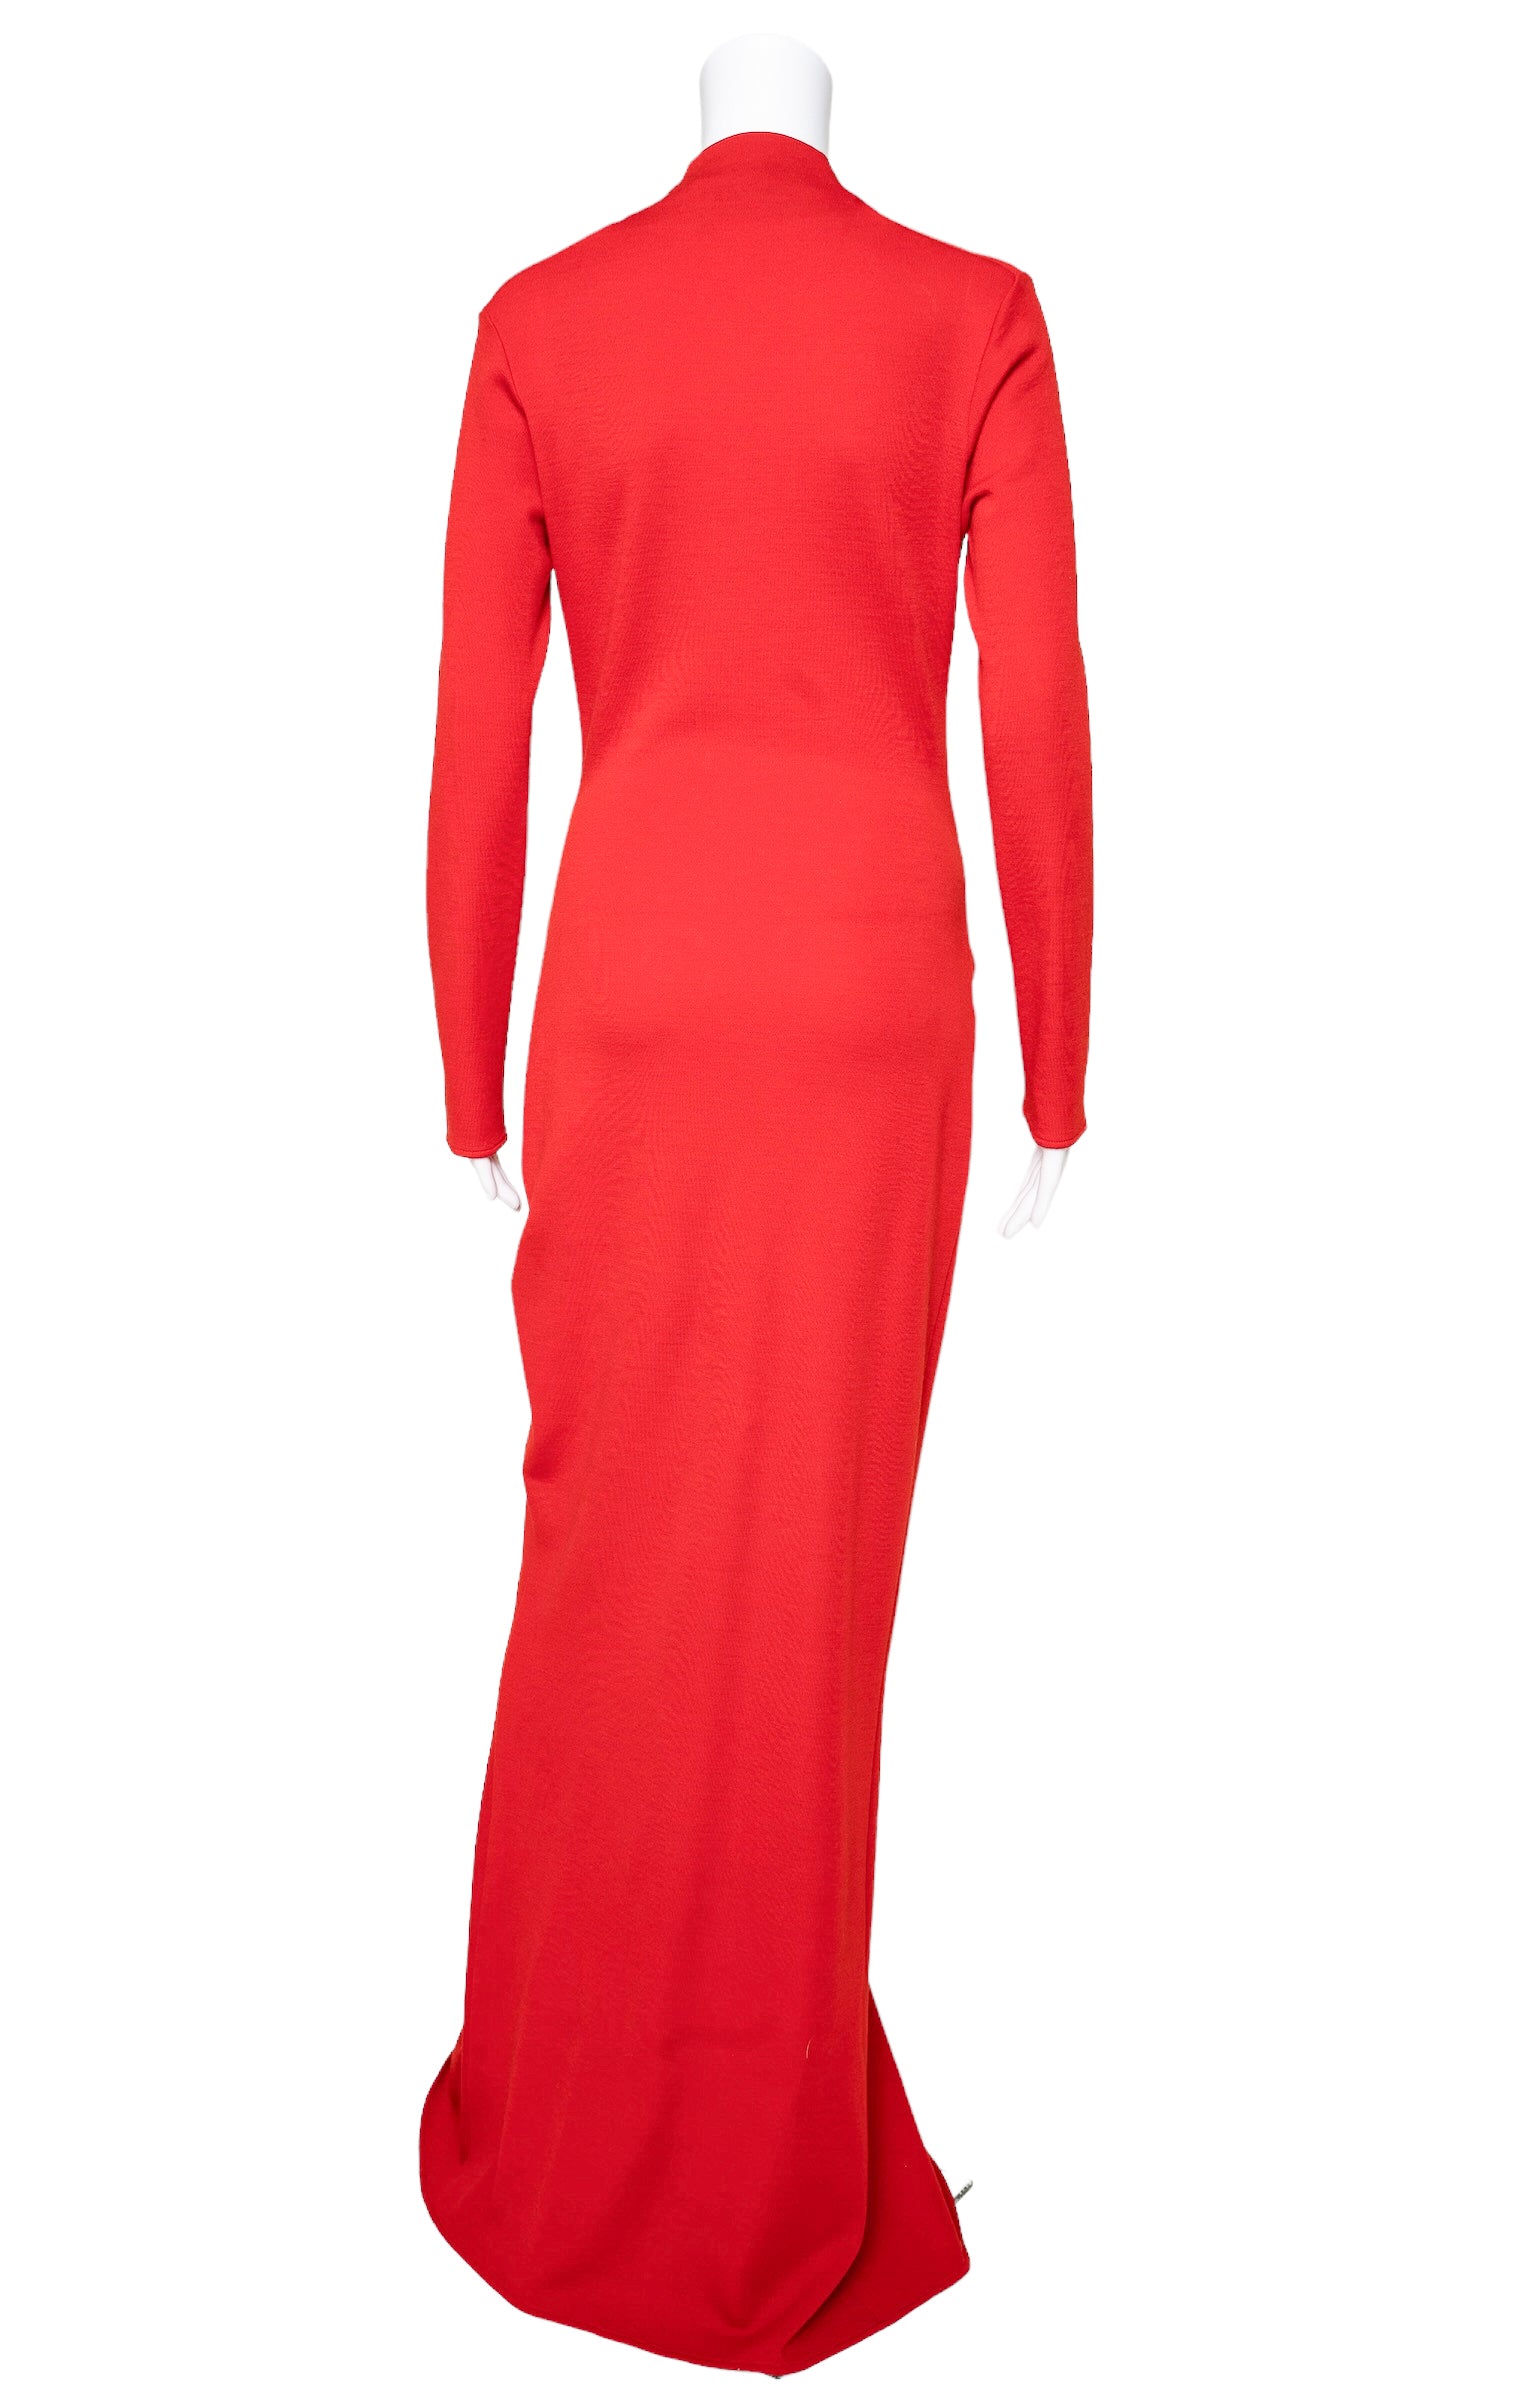 LANVIN (RARE) Dress Size: FR 38 / Comparable to US 4-6